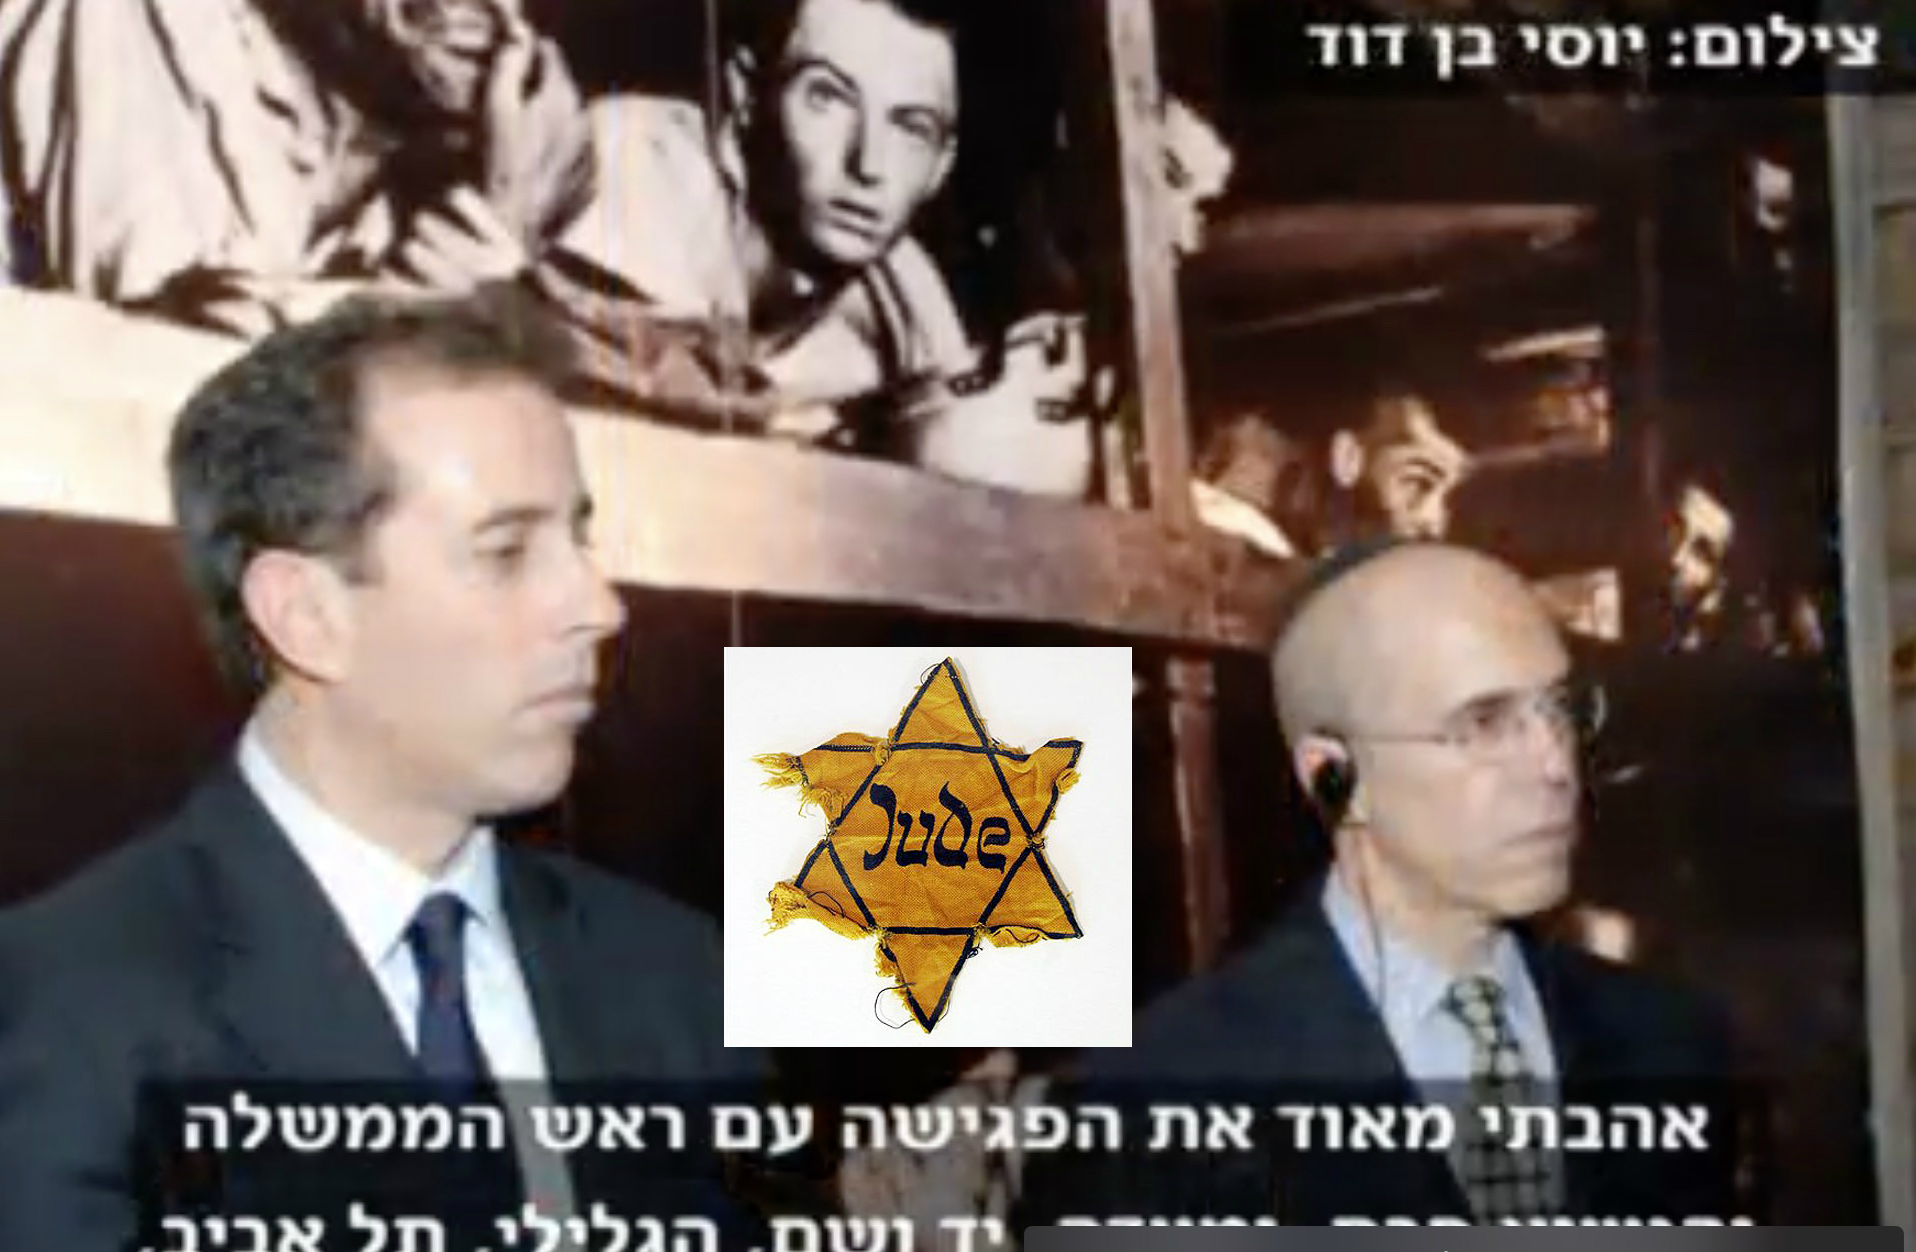 VIDEO: Jerry Seinfeld Zionist News Conference (Israel, November 2007)